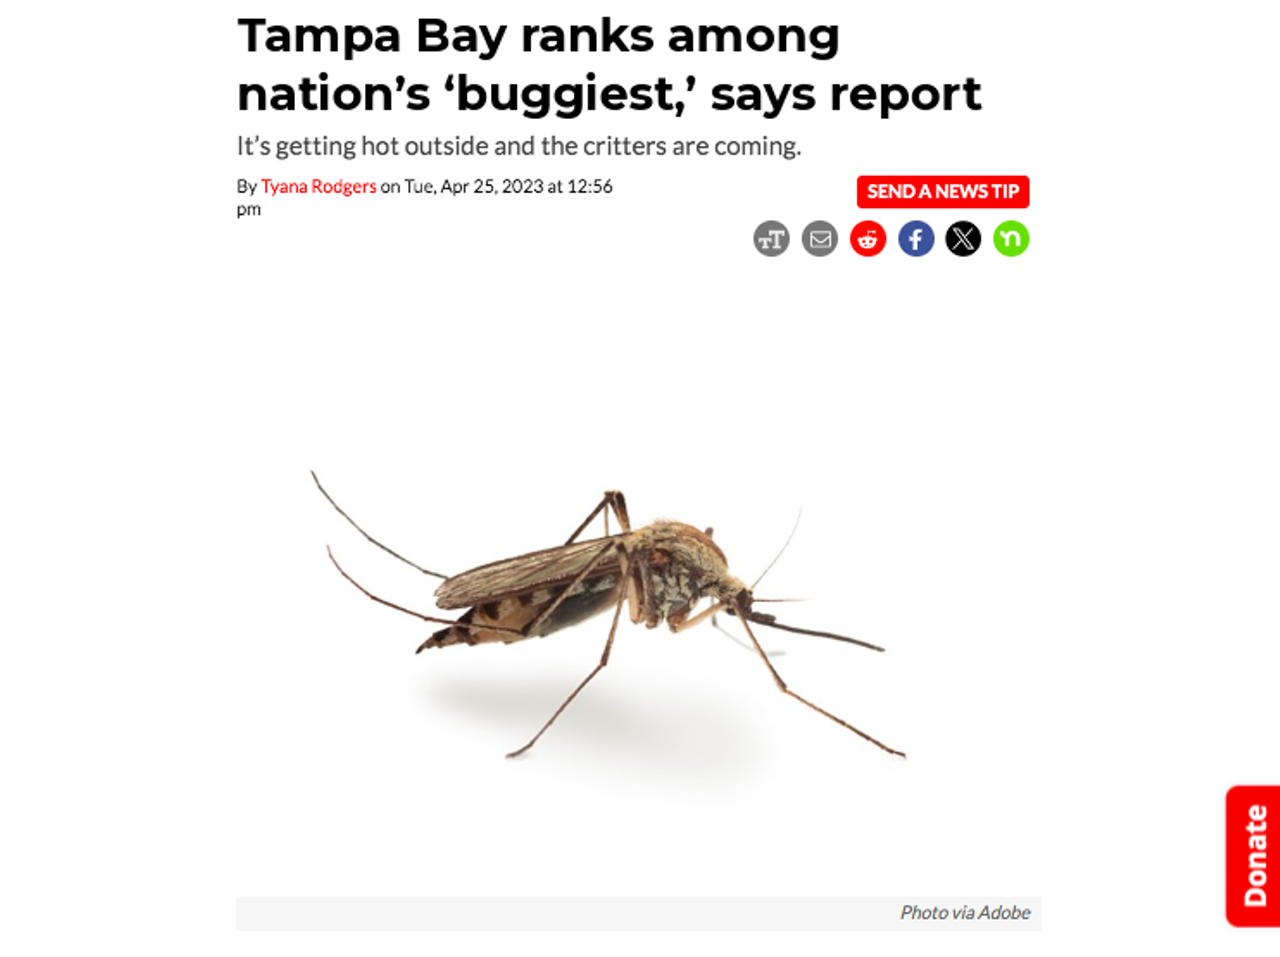 In a report released last spring by lawn care company TruGreen, Tampa Bay was ranked as one of the top five cities nationwide most impacted by outdoor pests—specifically mosquitos, fleas and ticks. The study places the Tampa-St. Petersburg-Sarasota region at No. 5 out of the country's 20 largest metros. Read the full story here. 